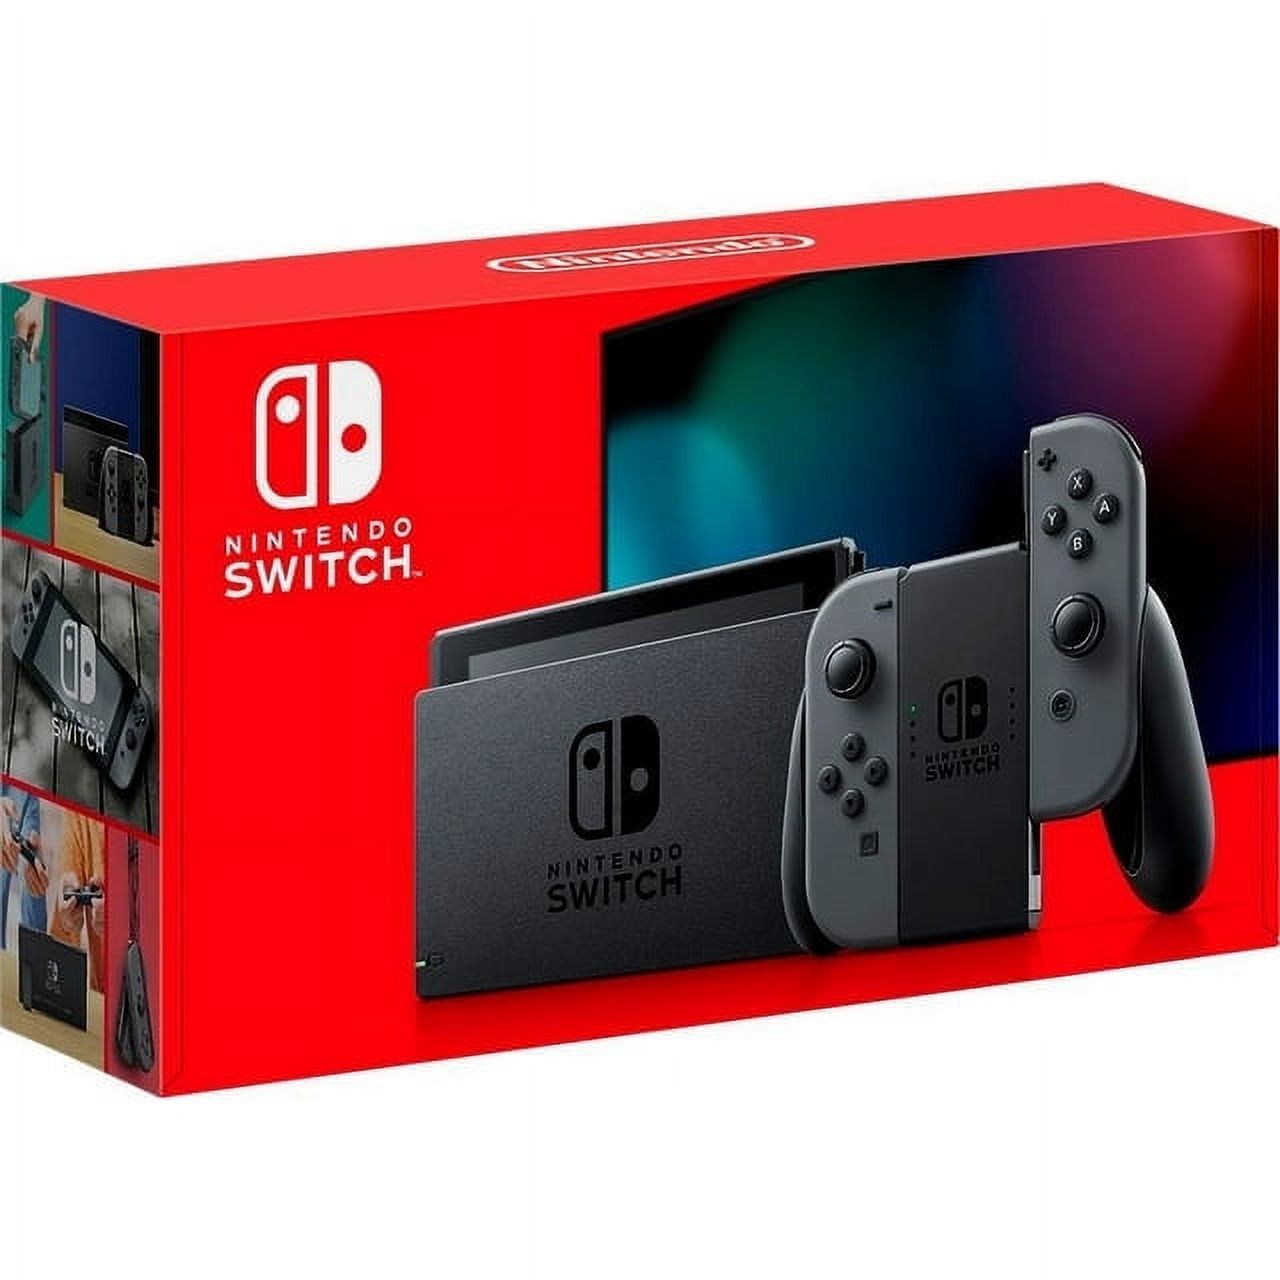 Nintendo Switch Console With Gray Joy-Con (2019) - image 1 of 5